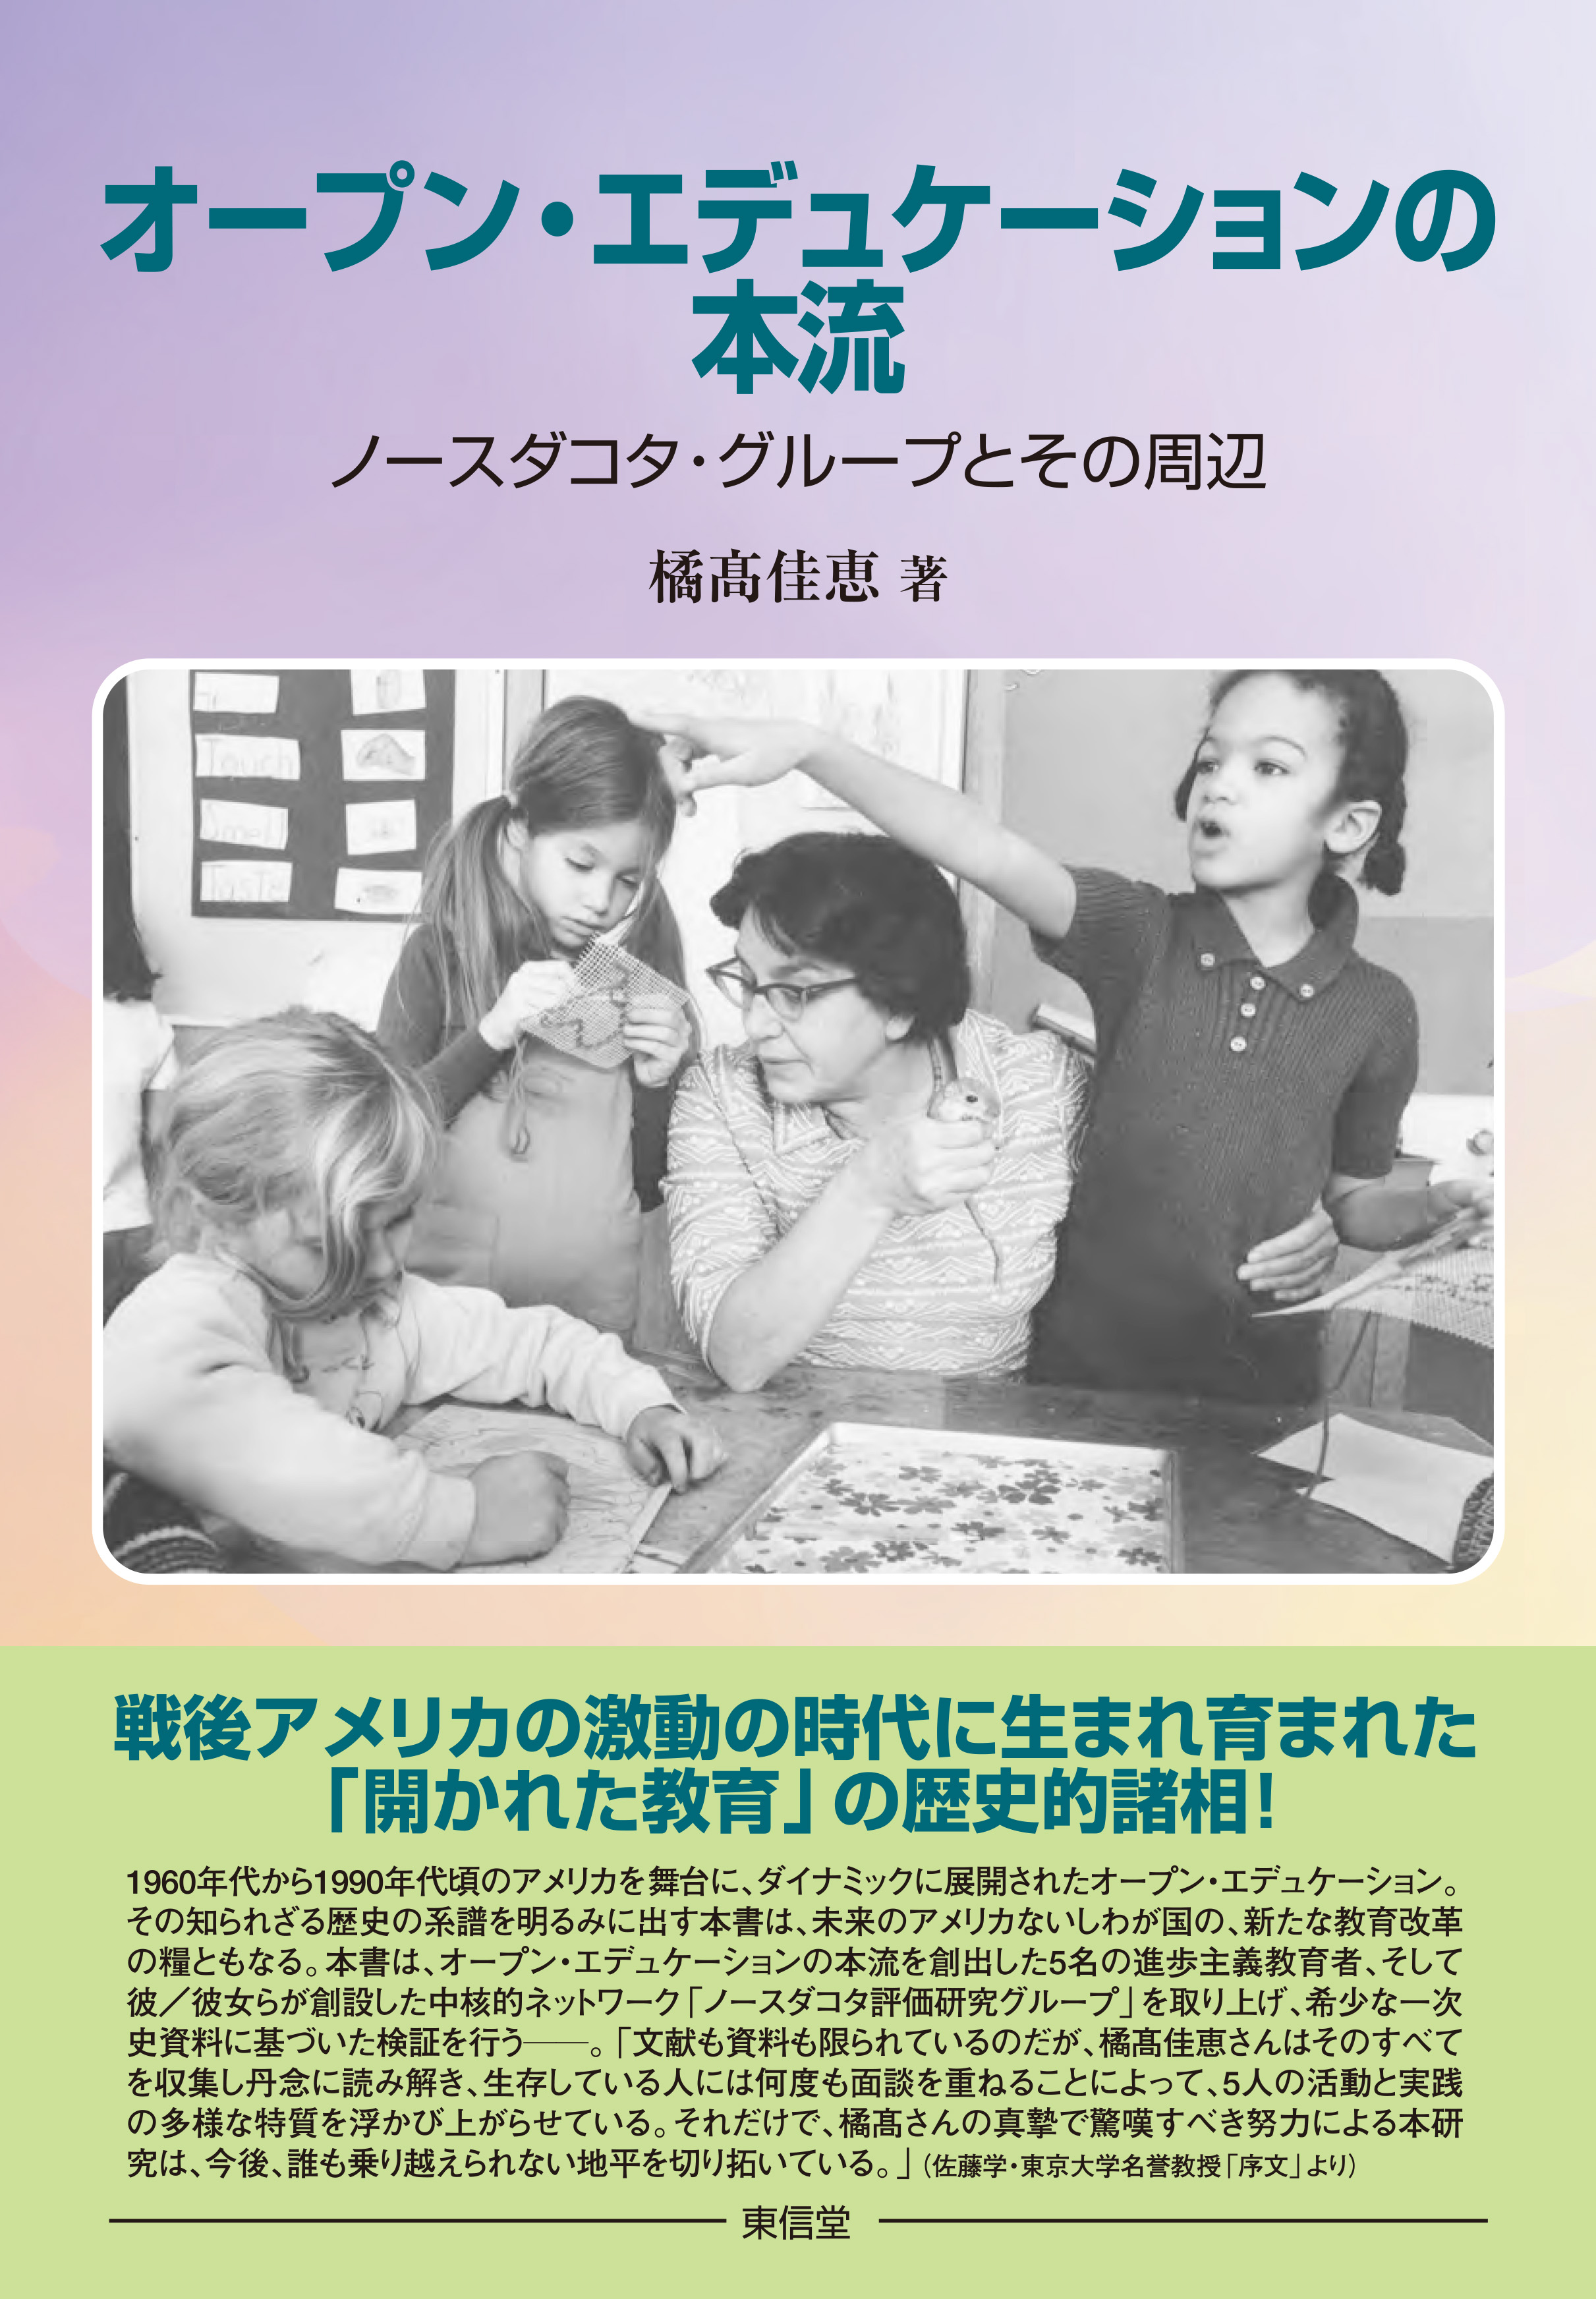 a picture of a woman looks like a teacher and three children making something at a table on a pale purple-and-yellow cover  